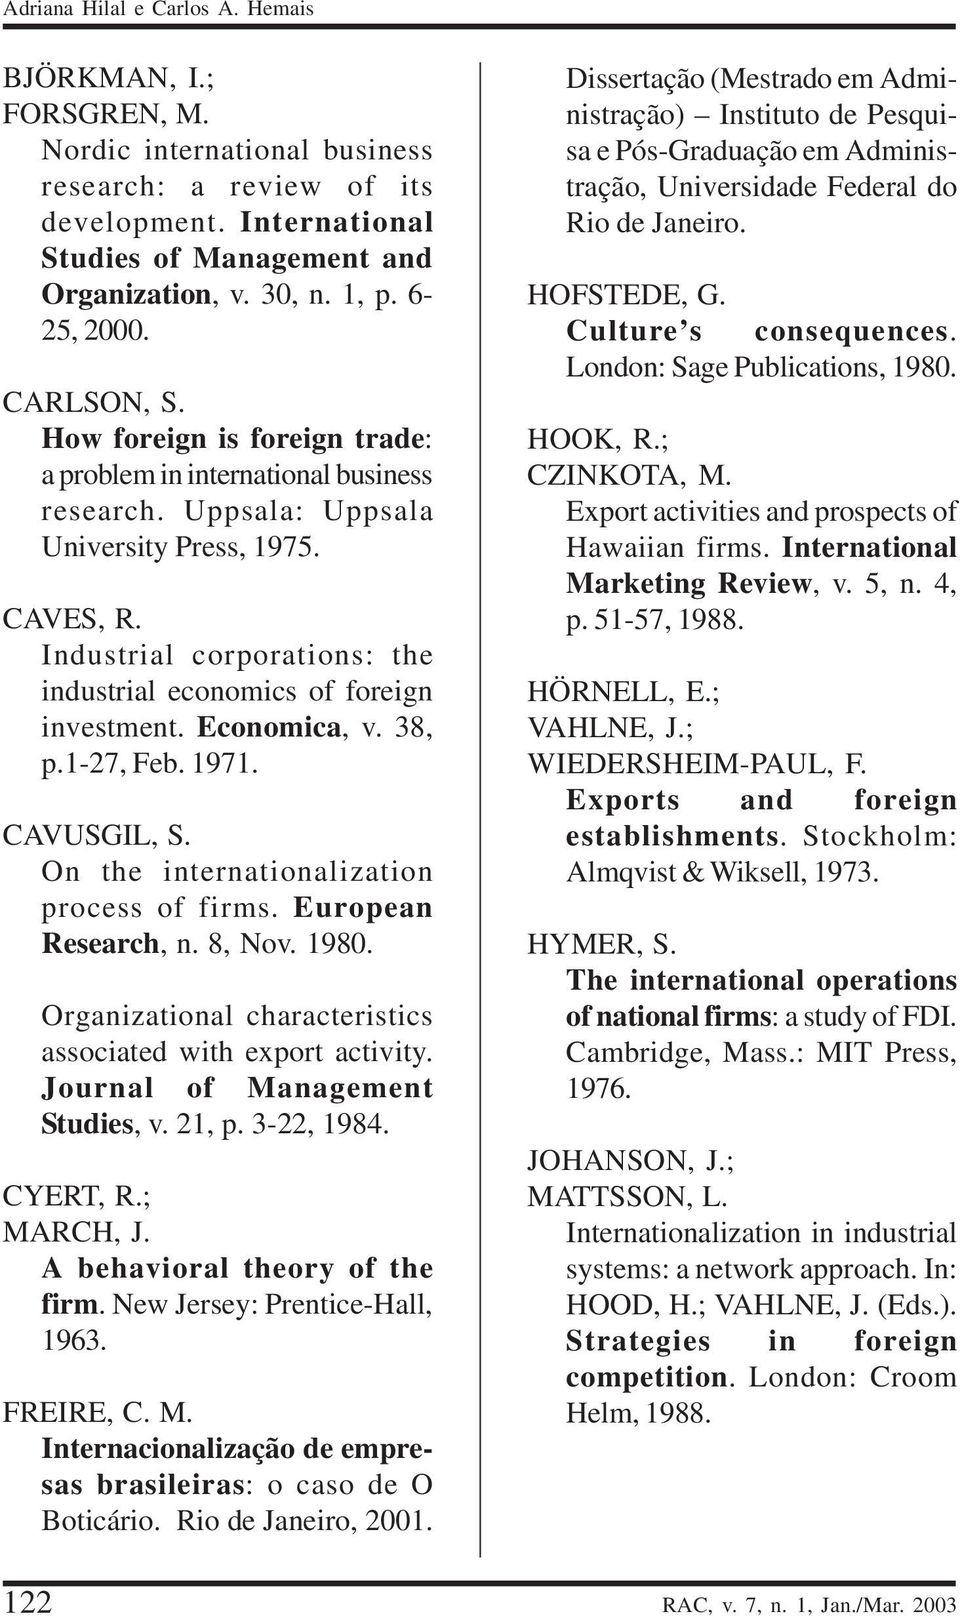 Industrial corporations: the industrial economics of foreign investment. Economica, v. 38, p.1-27, Feb. 1971. CAVUSGIL, S. On the internationalization process of firms. European Research, n. 8, Nov.